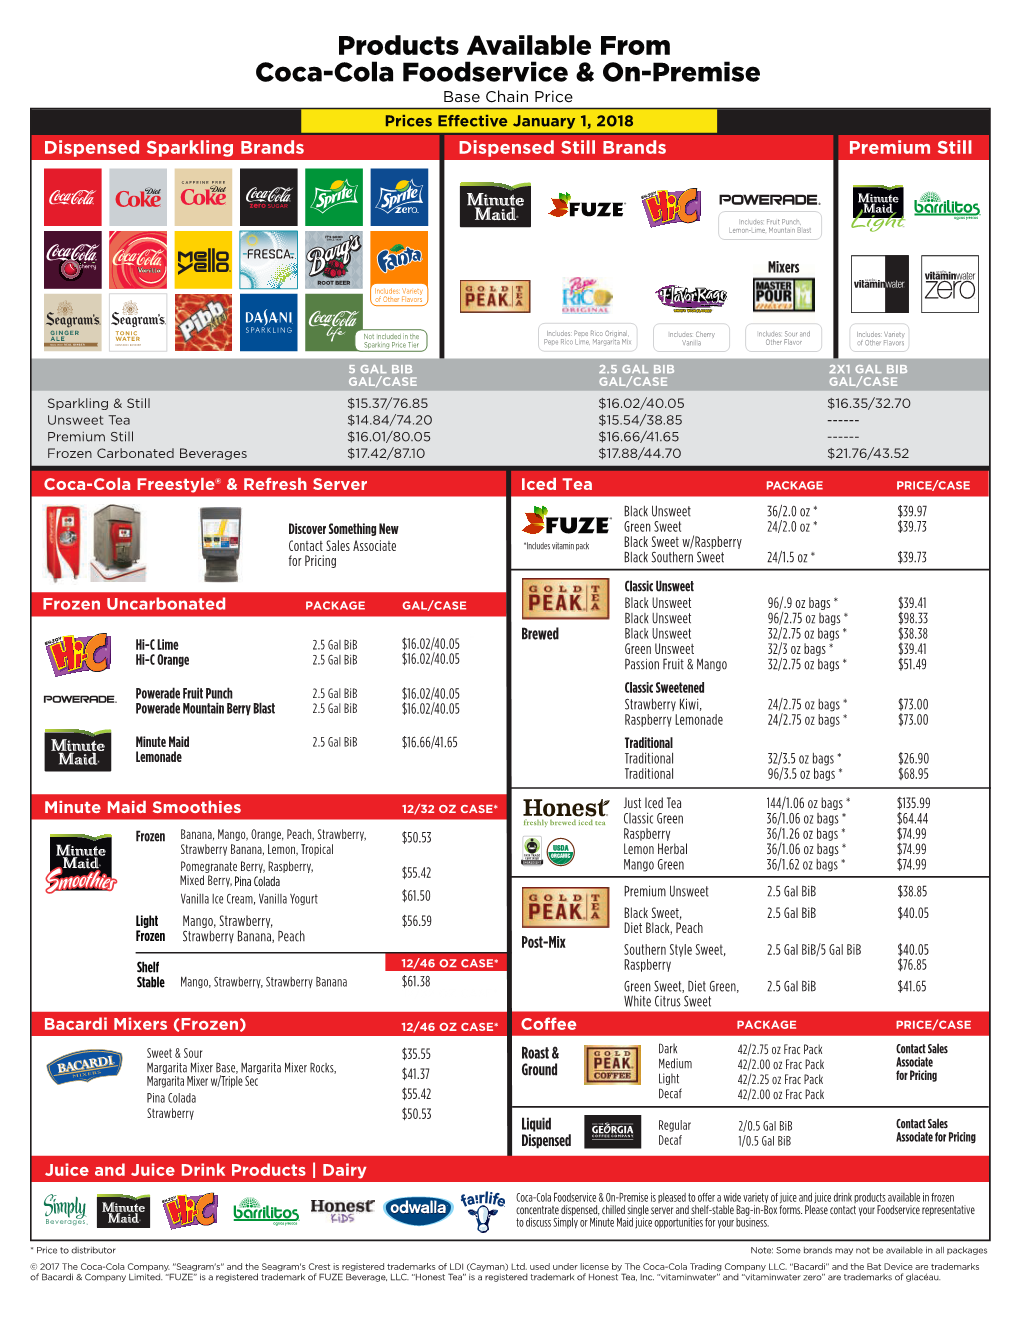 Products Available from Coca-Cola Foodservice & On-Premise